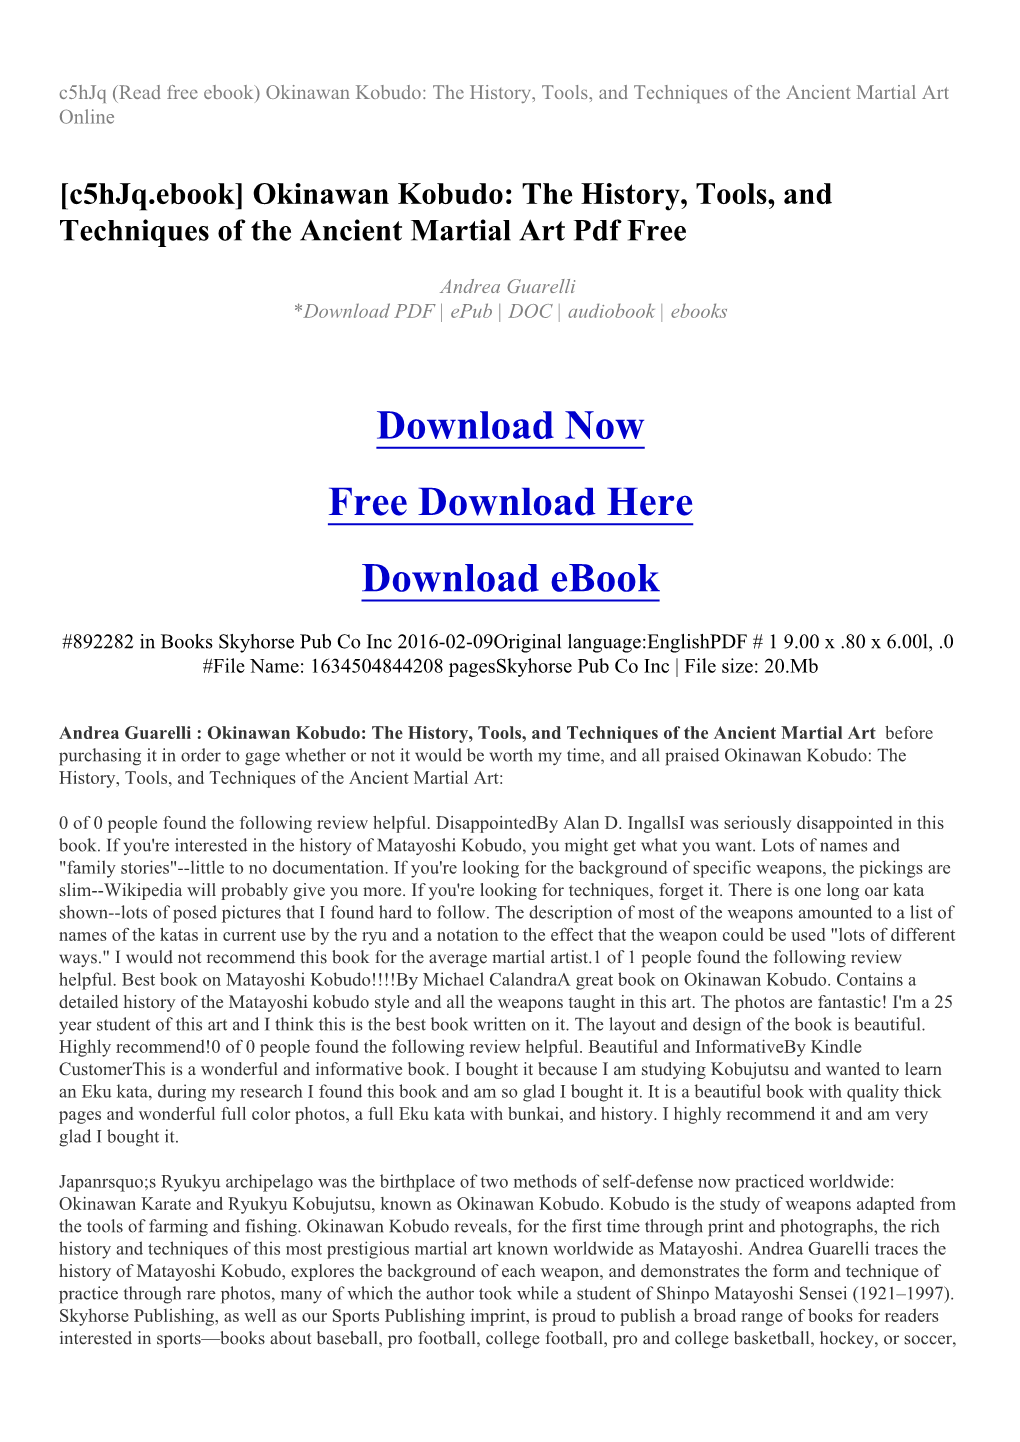 Okinawan Kobudo: the History, Tools, and Techniques of the Ancient Martial Art Online